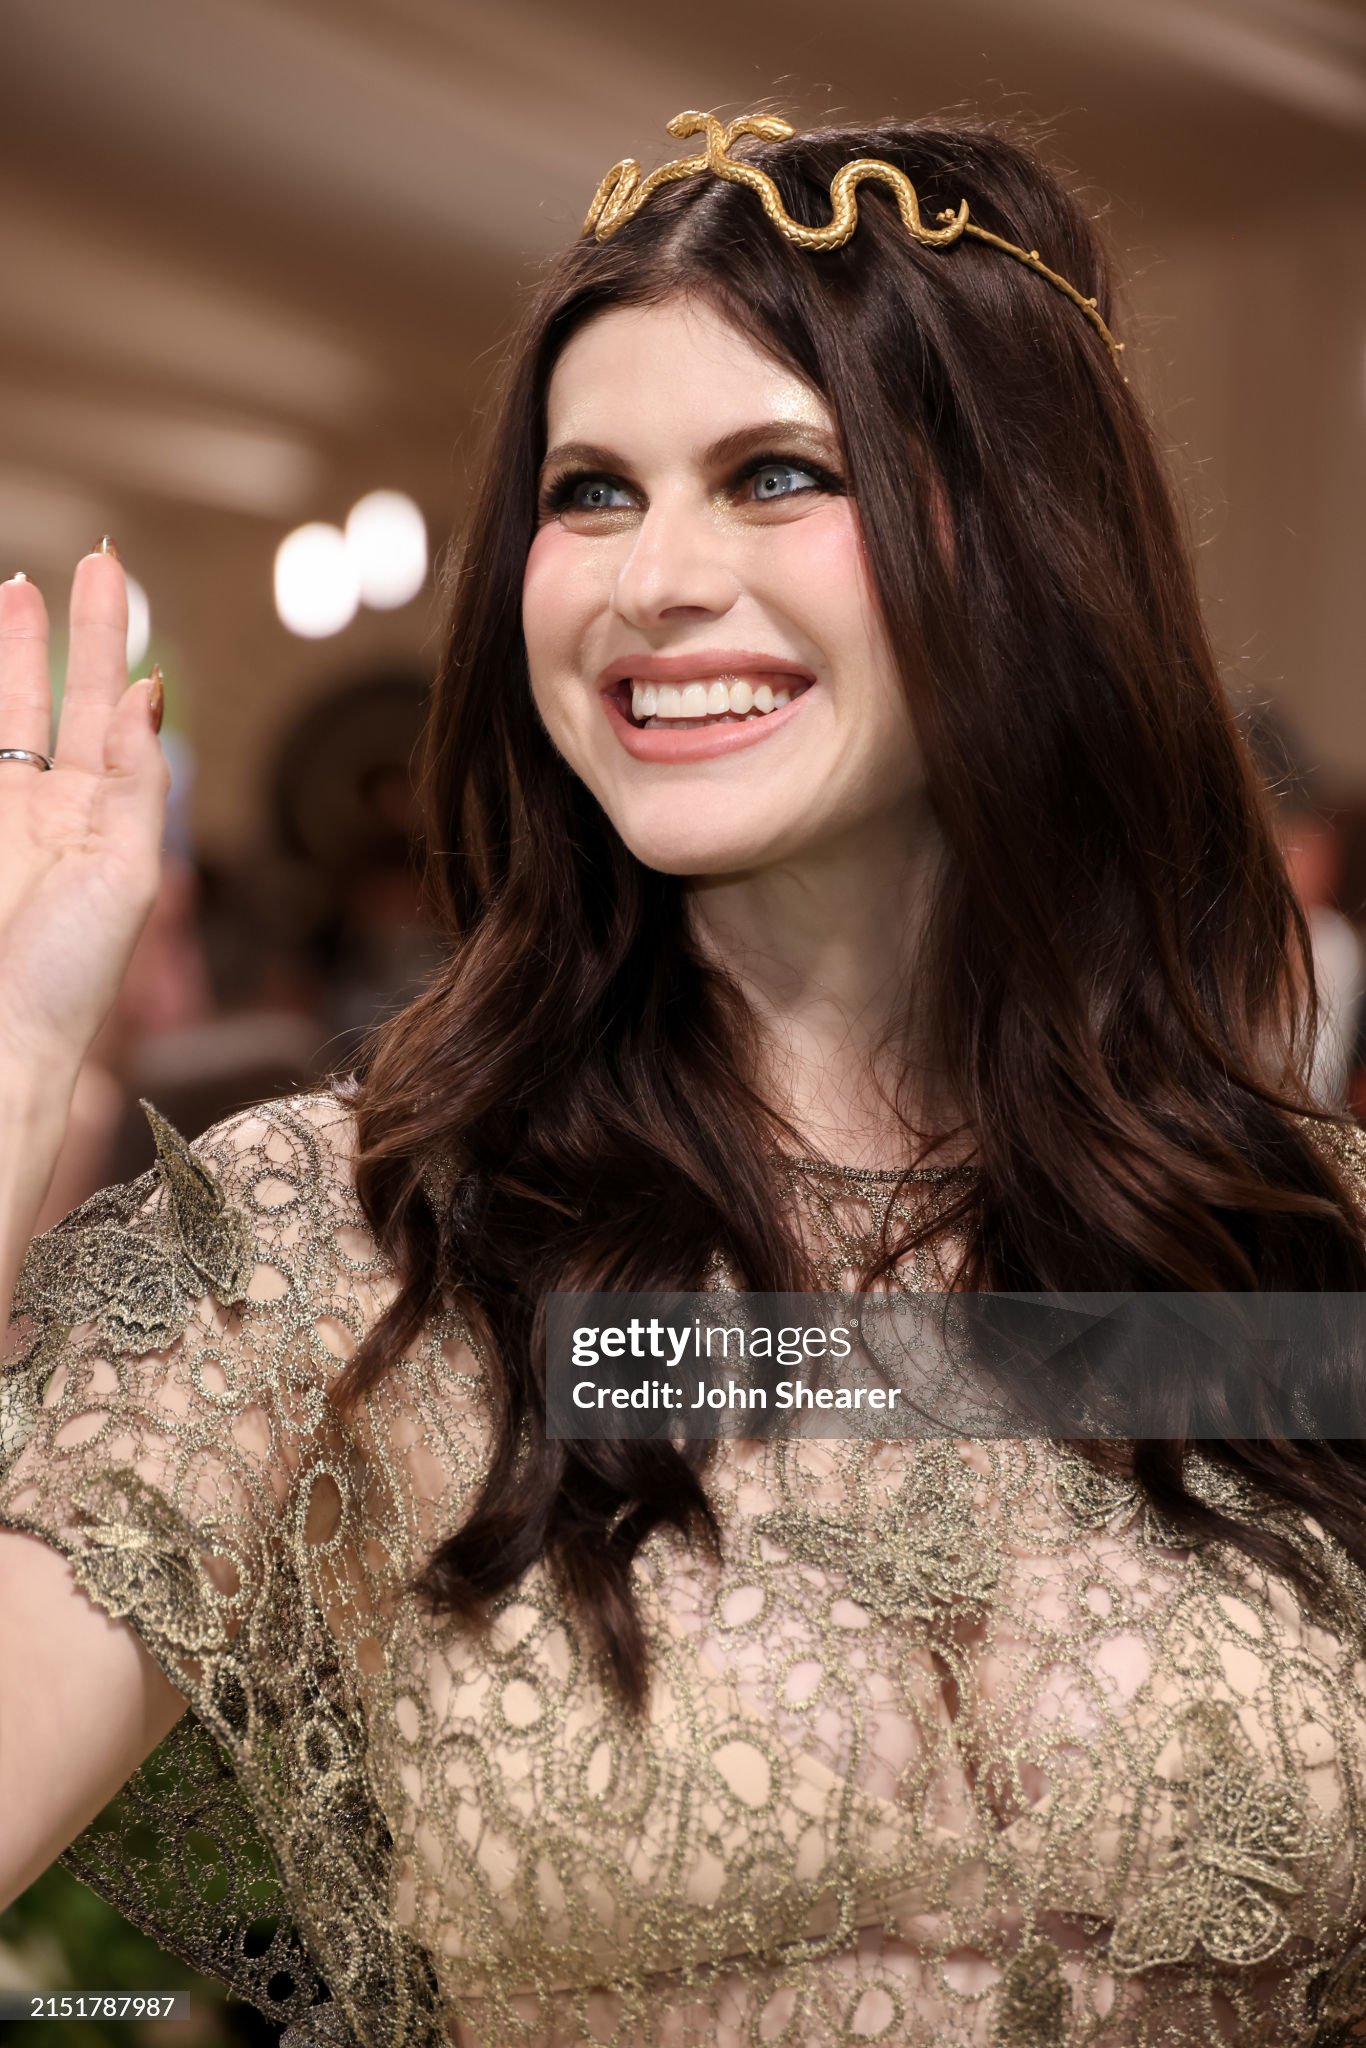 gettyimages-2151787987-2048x2048.jpg